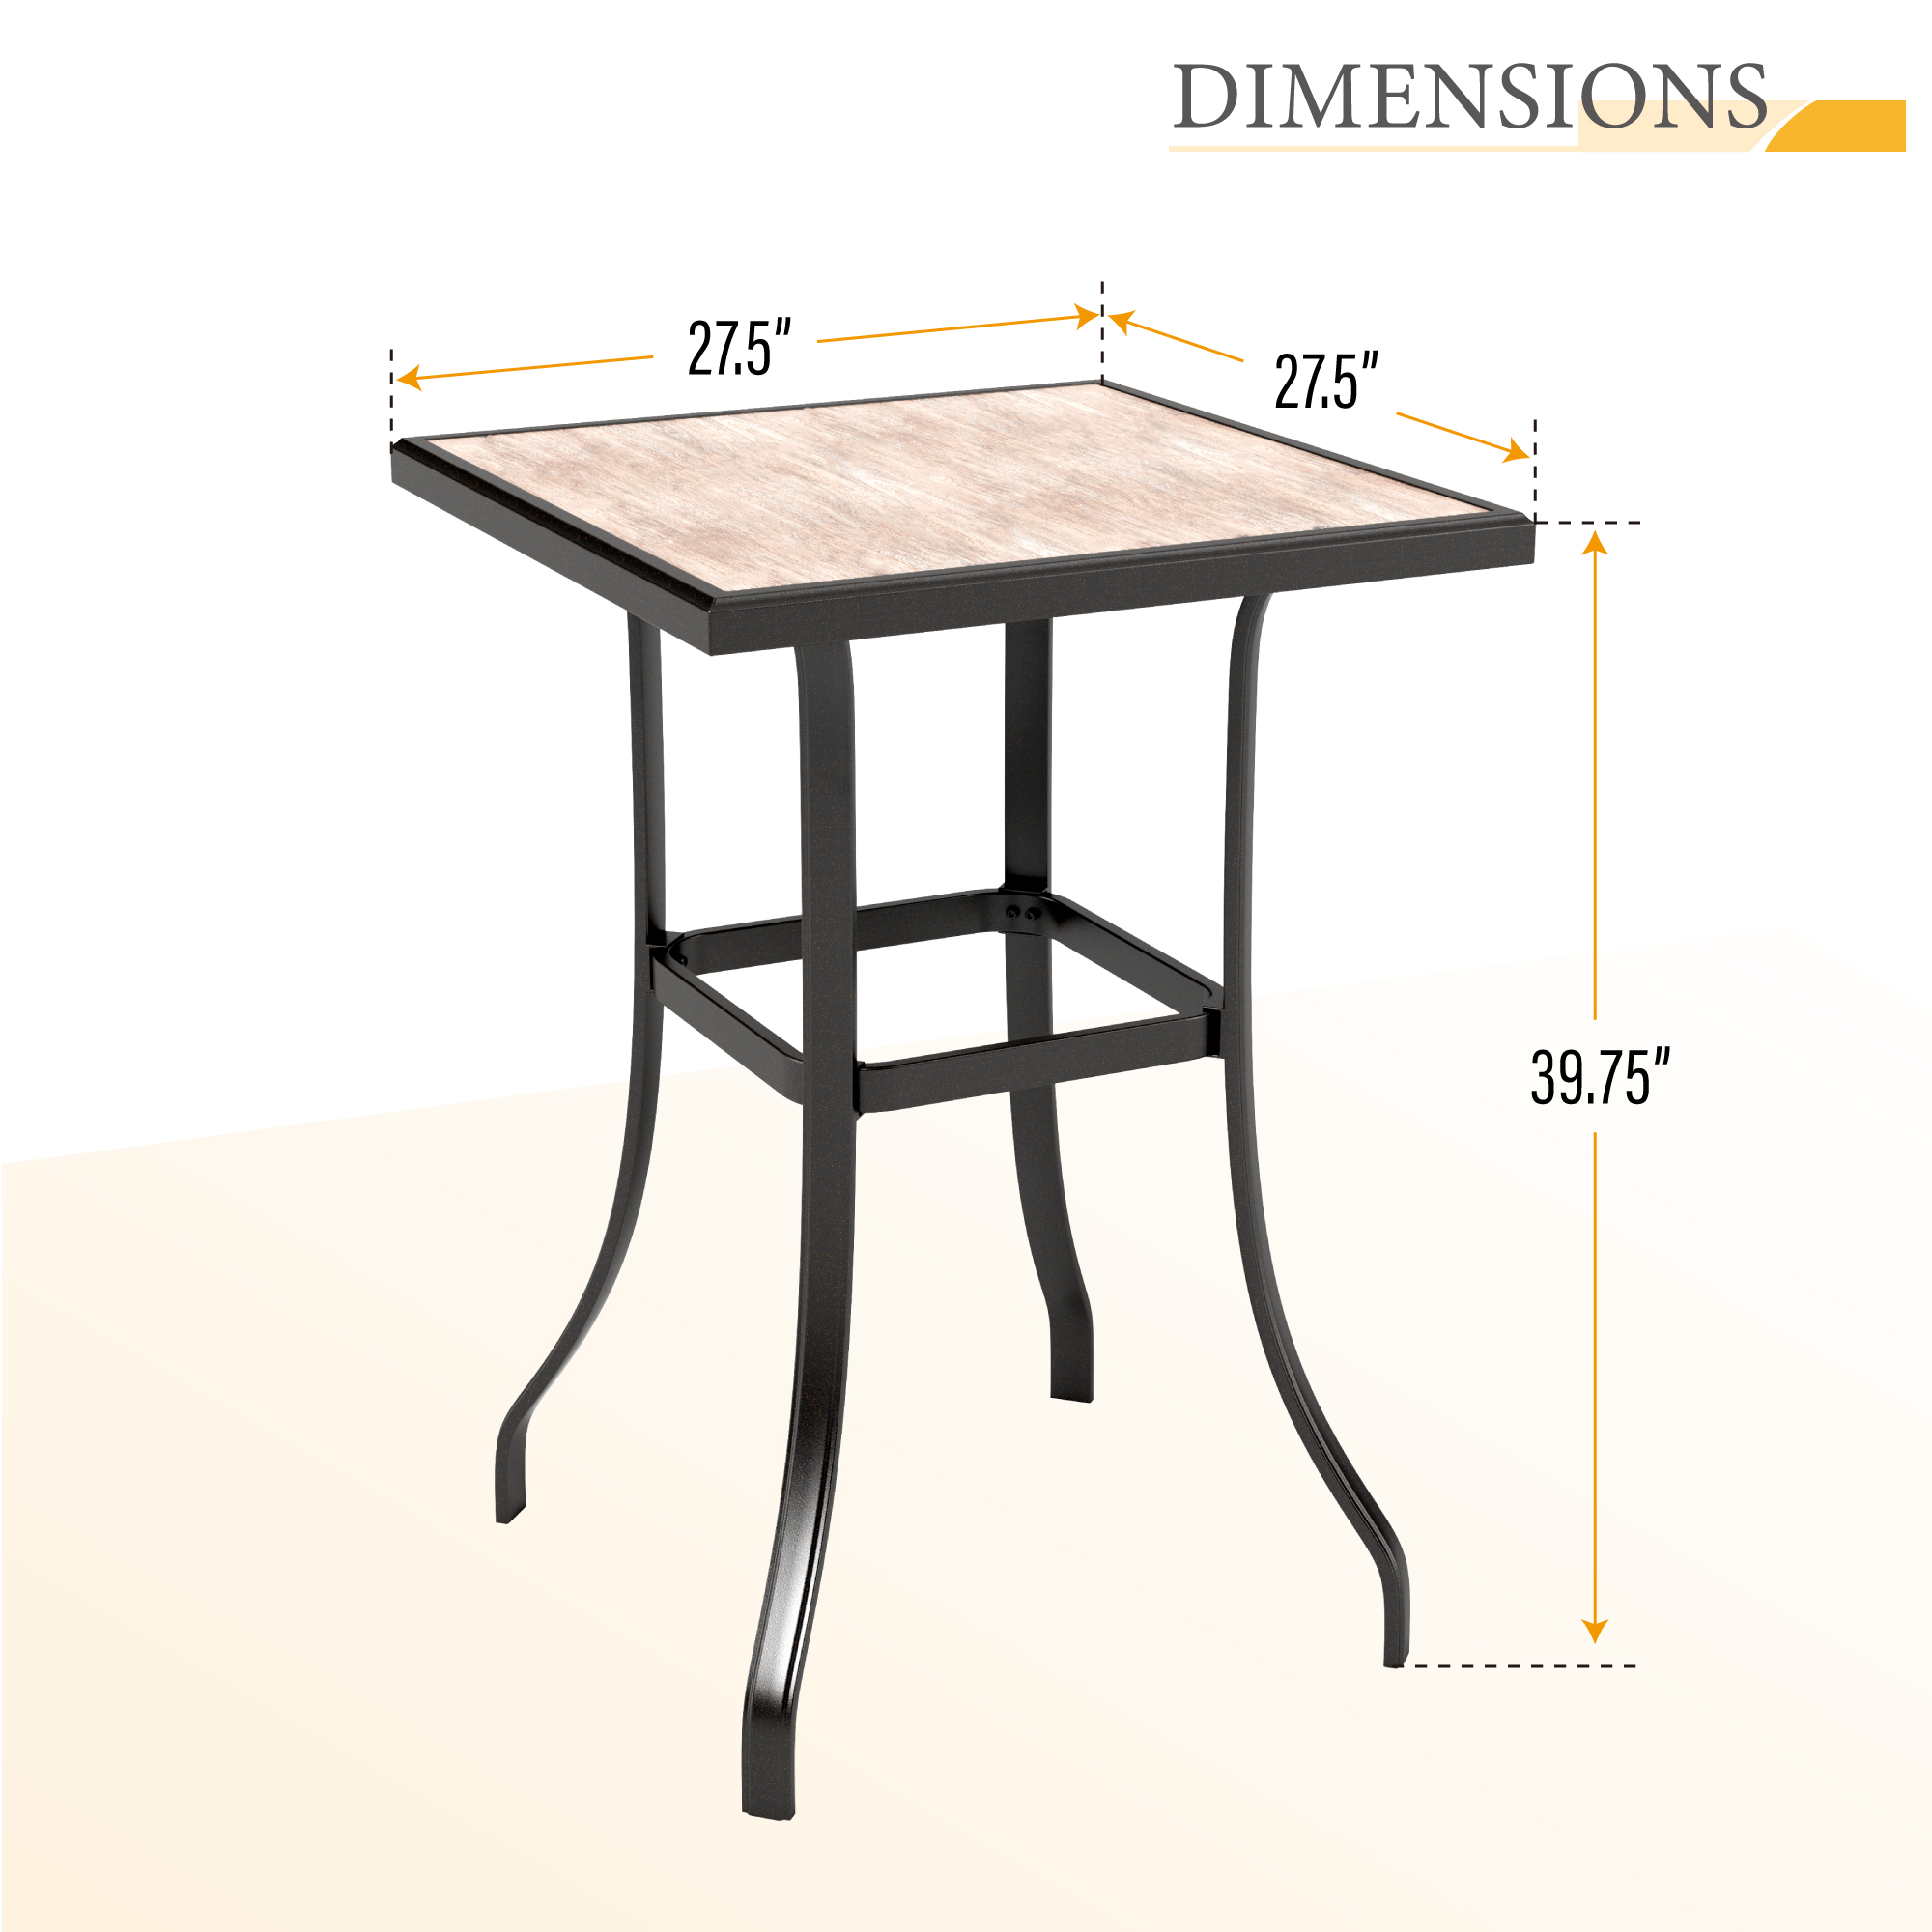 MF Studio 40"H Patio Bar Table,Outdoor Bar Height Dining Table with Wooden-like Top and Metal Frame,Black - image 2 of 7